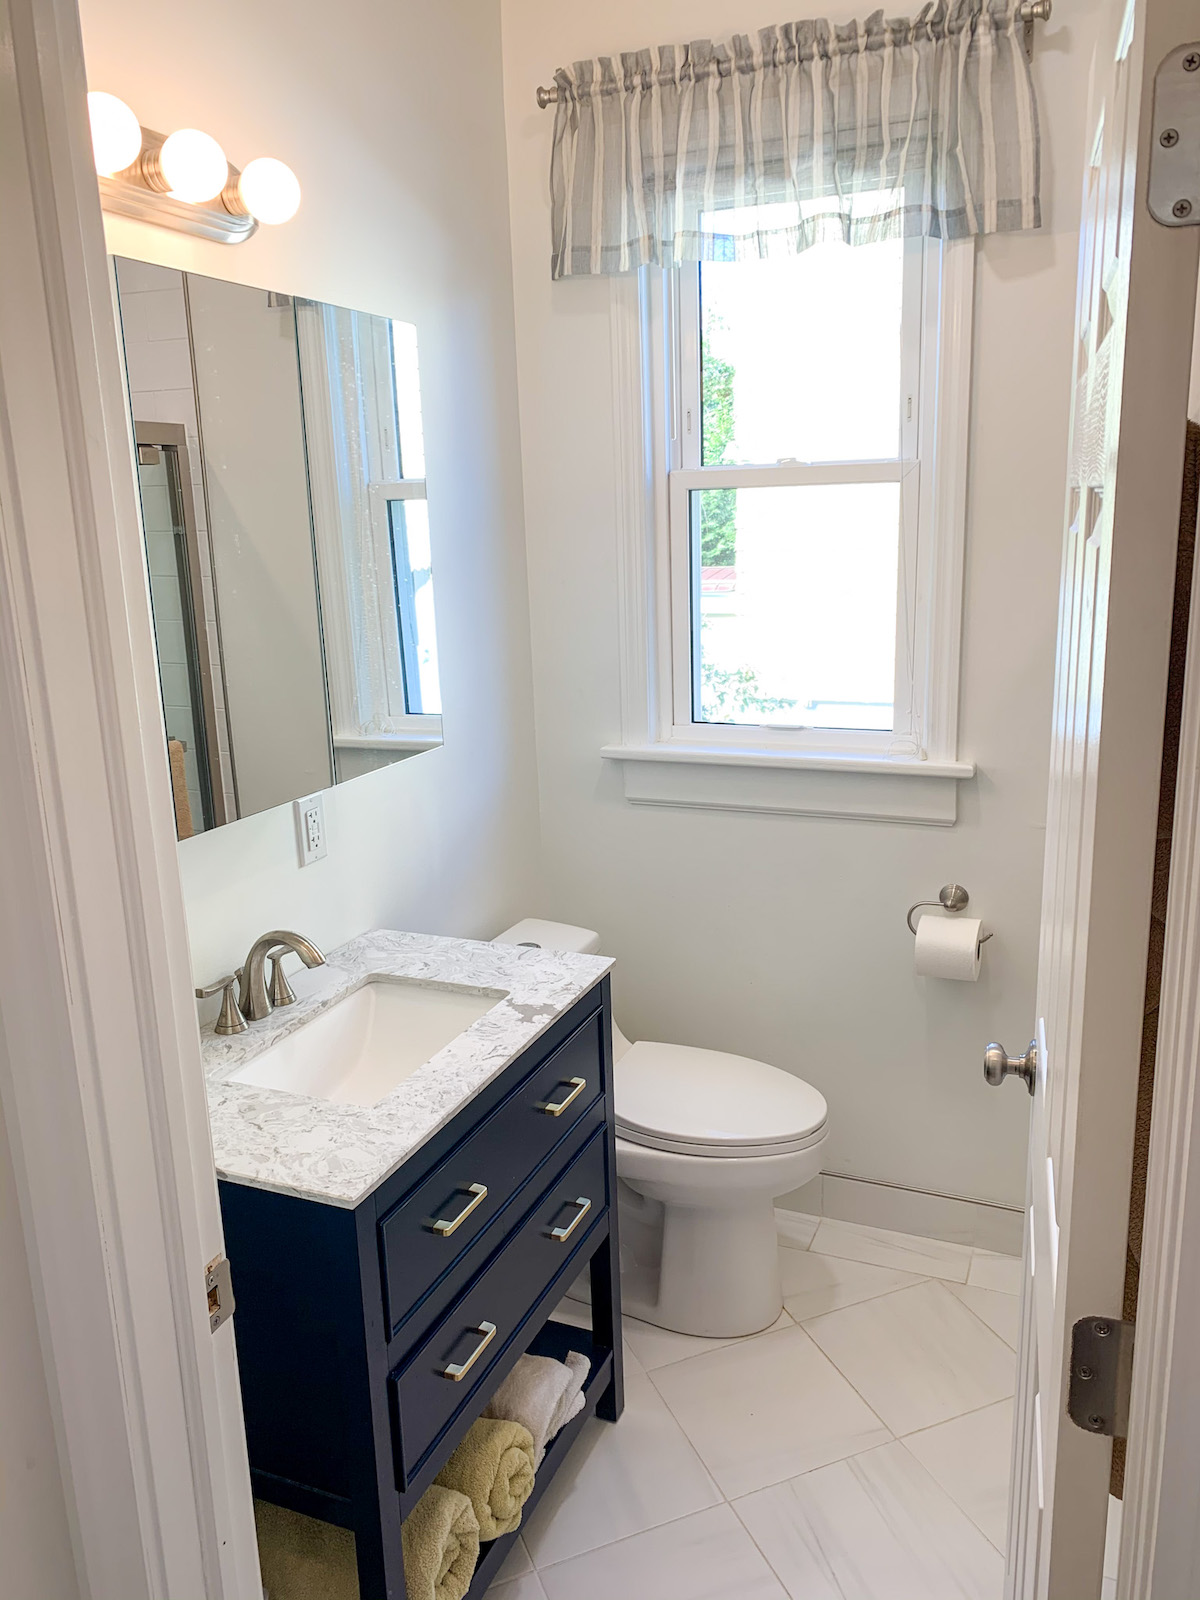 A Simple Bathroom Remodel Before & After – First Floor, Part 3